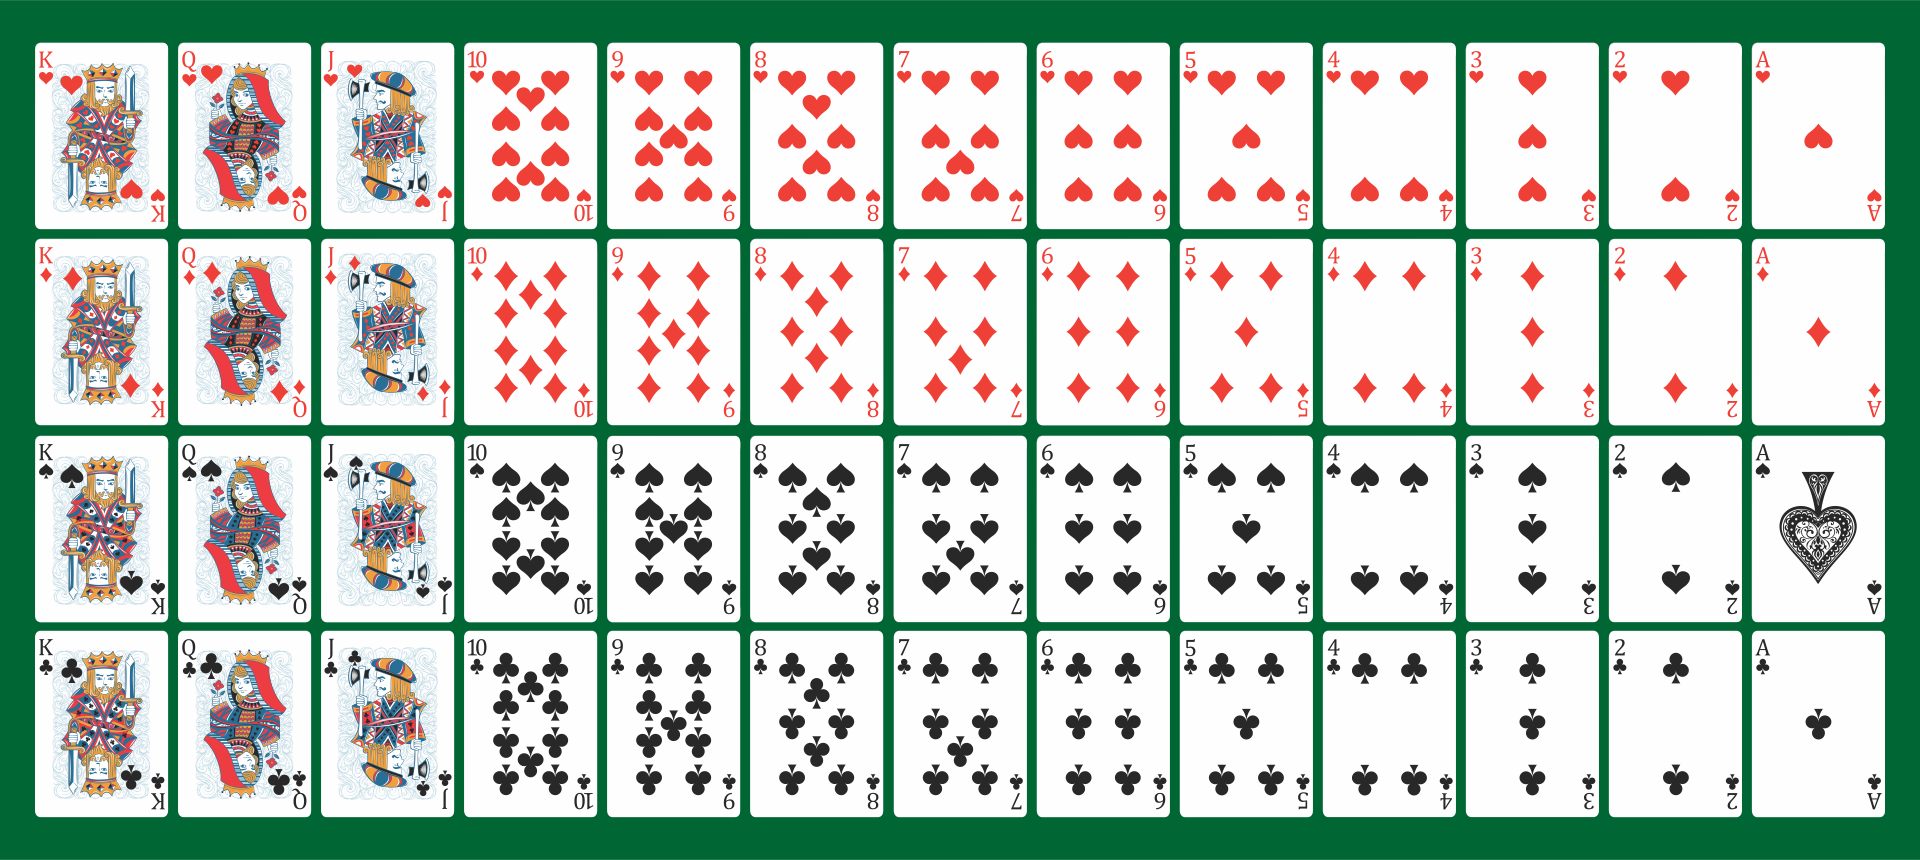 card game of golf with 8 cards